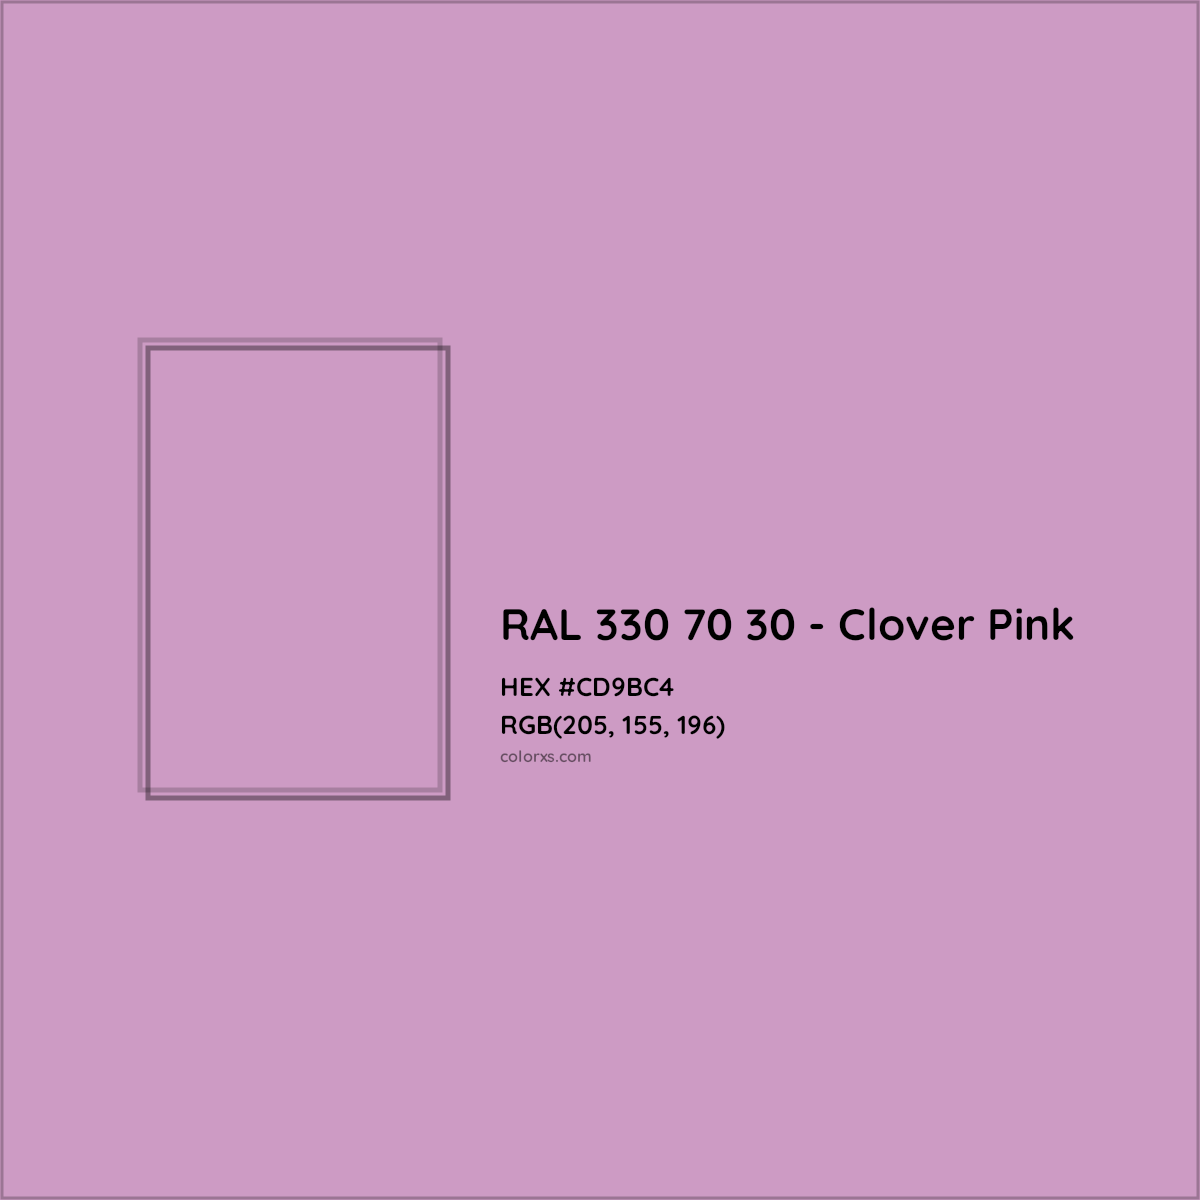 HEX #CD9BC4 RAL 330 70 30 - Clover Pink CMS RAL Design - Color Code